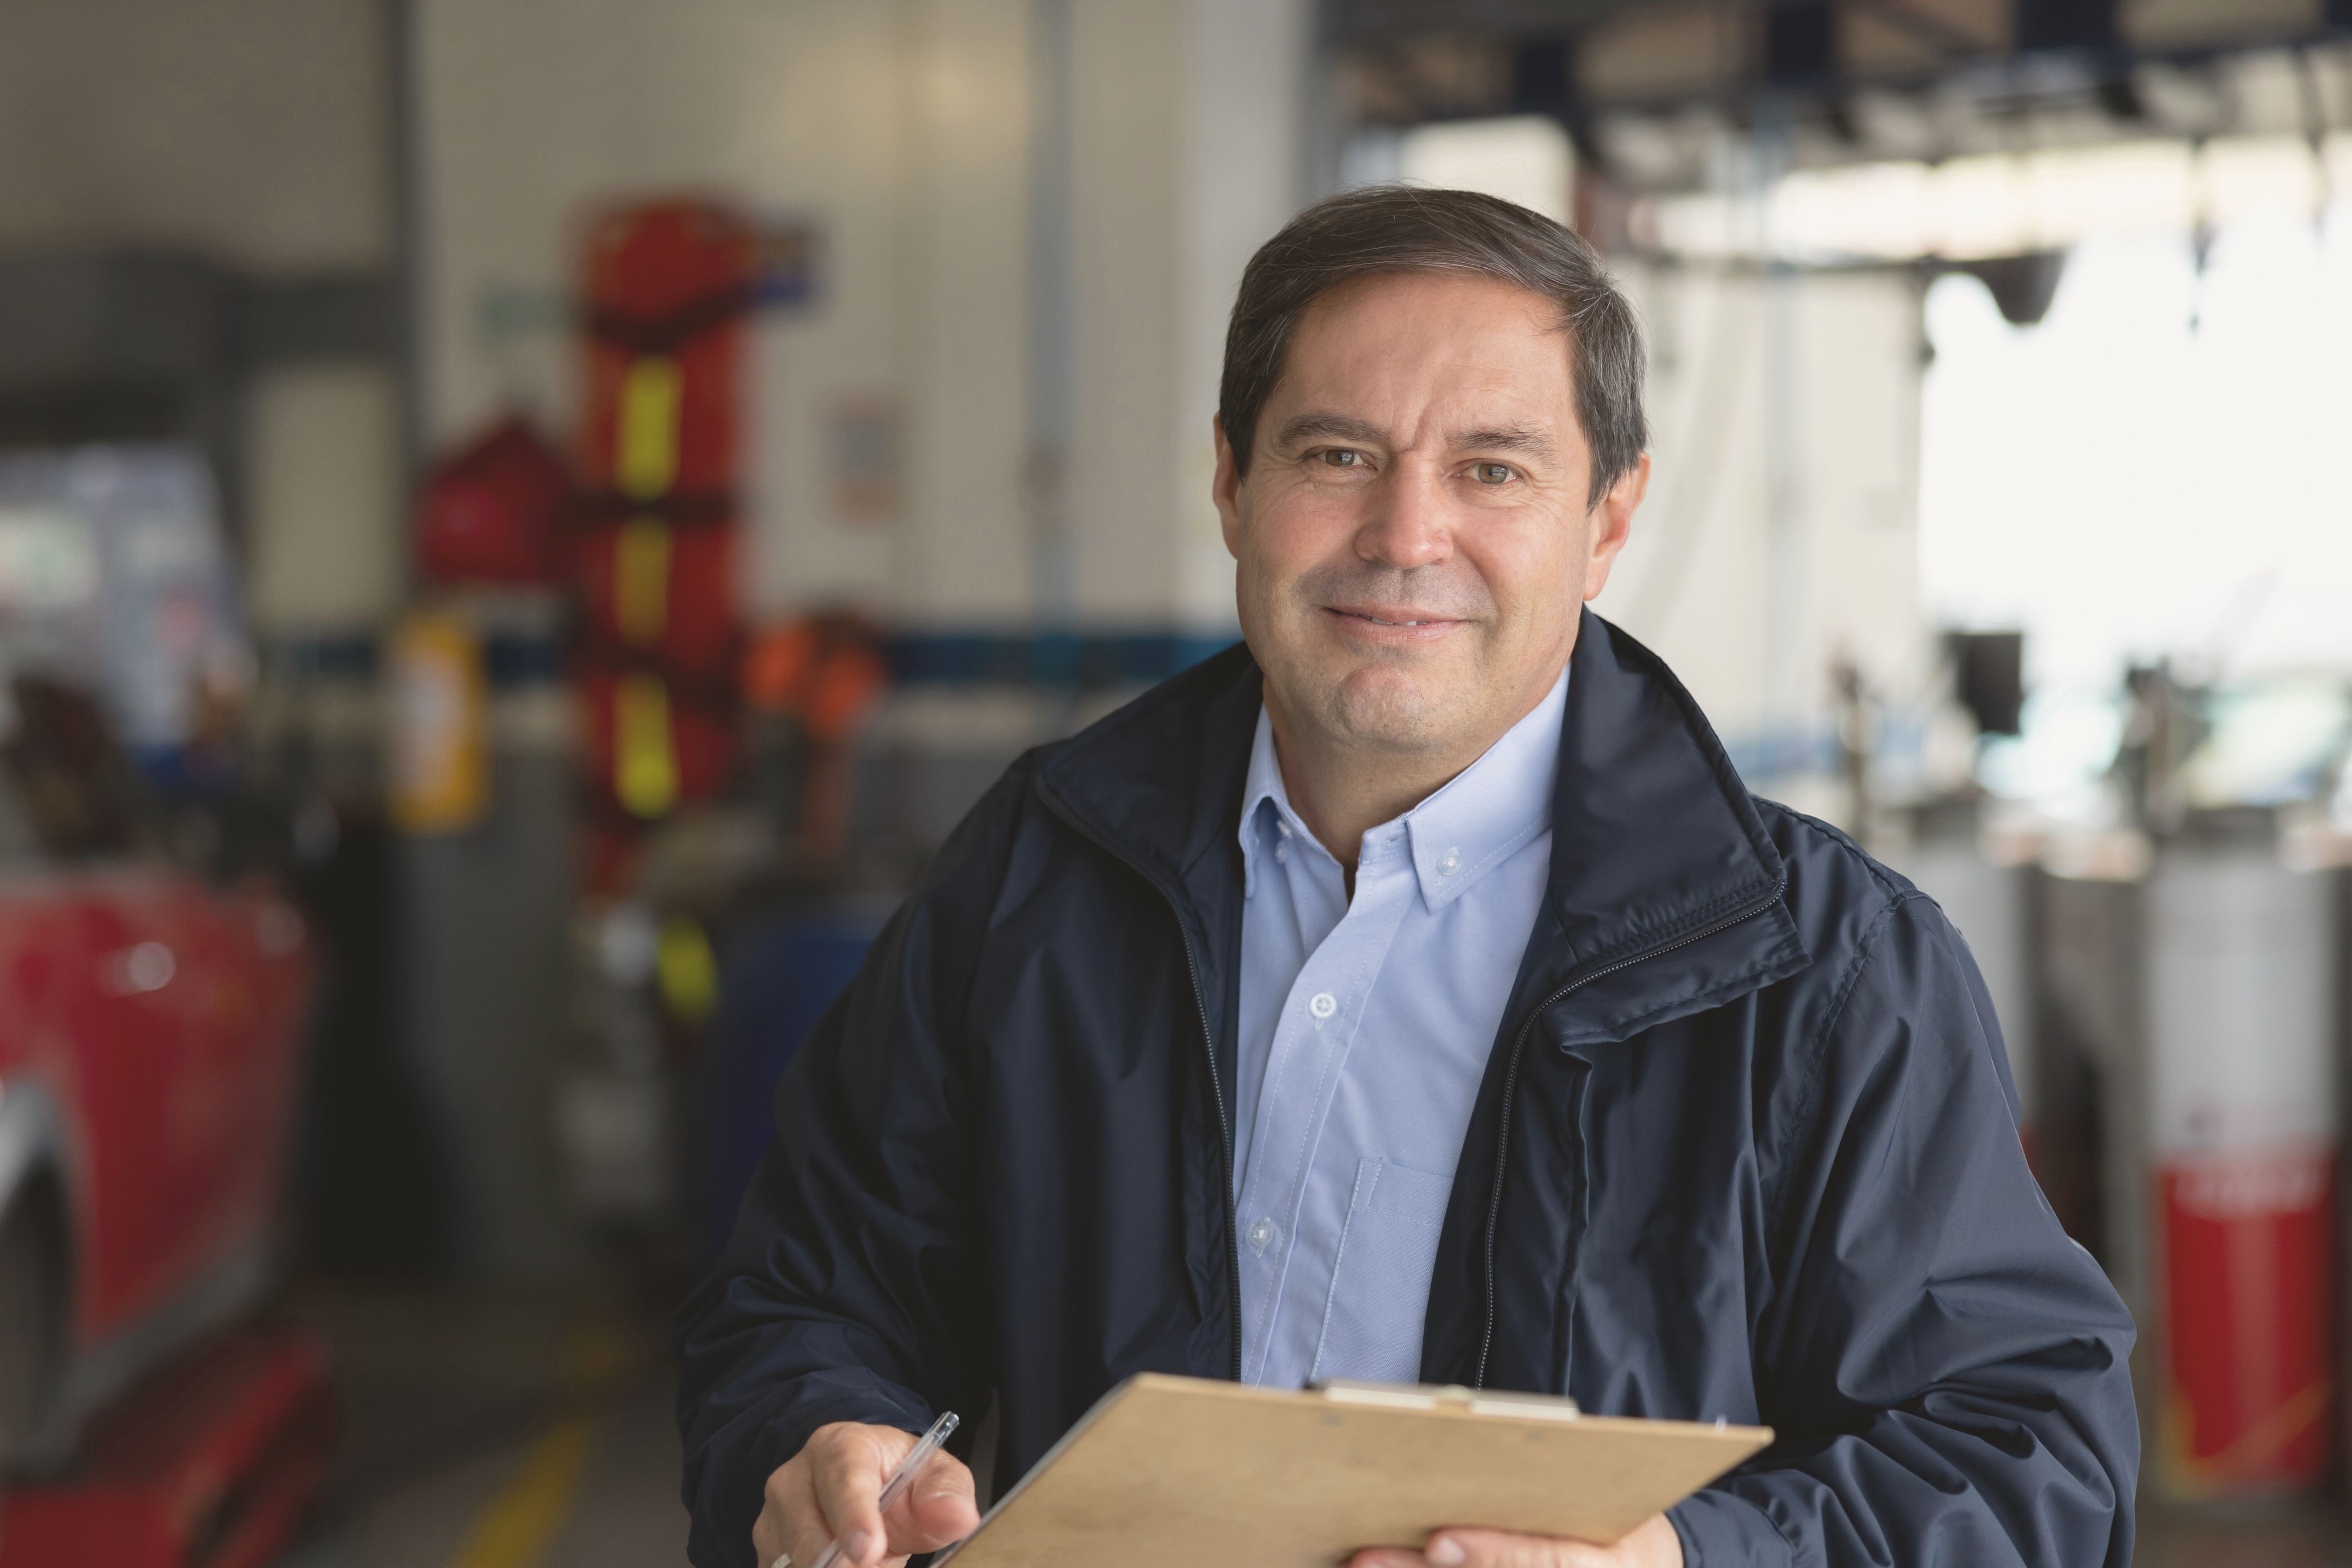 Auto repair shops run well with the right accounting practices.